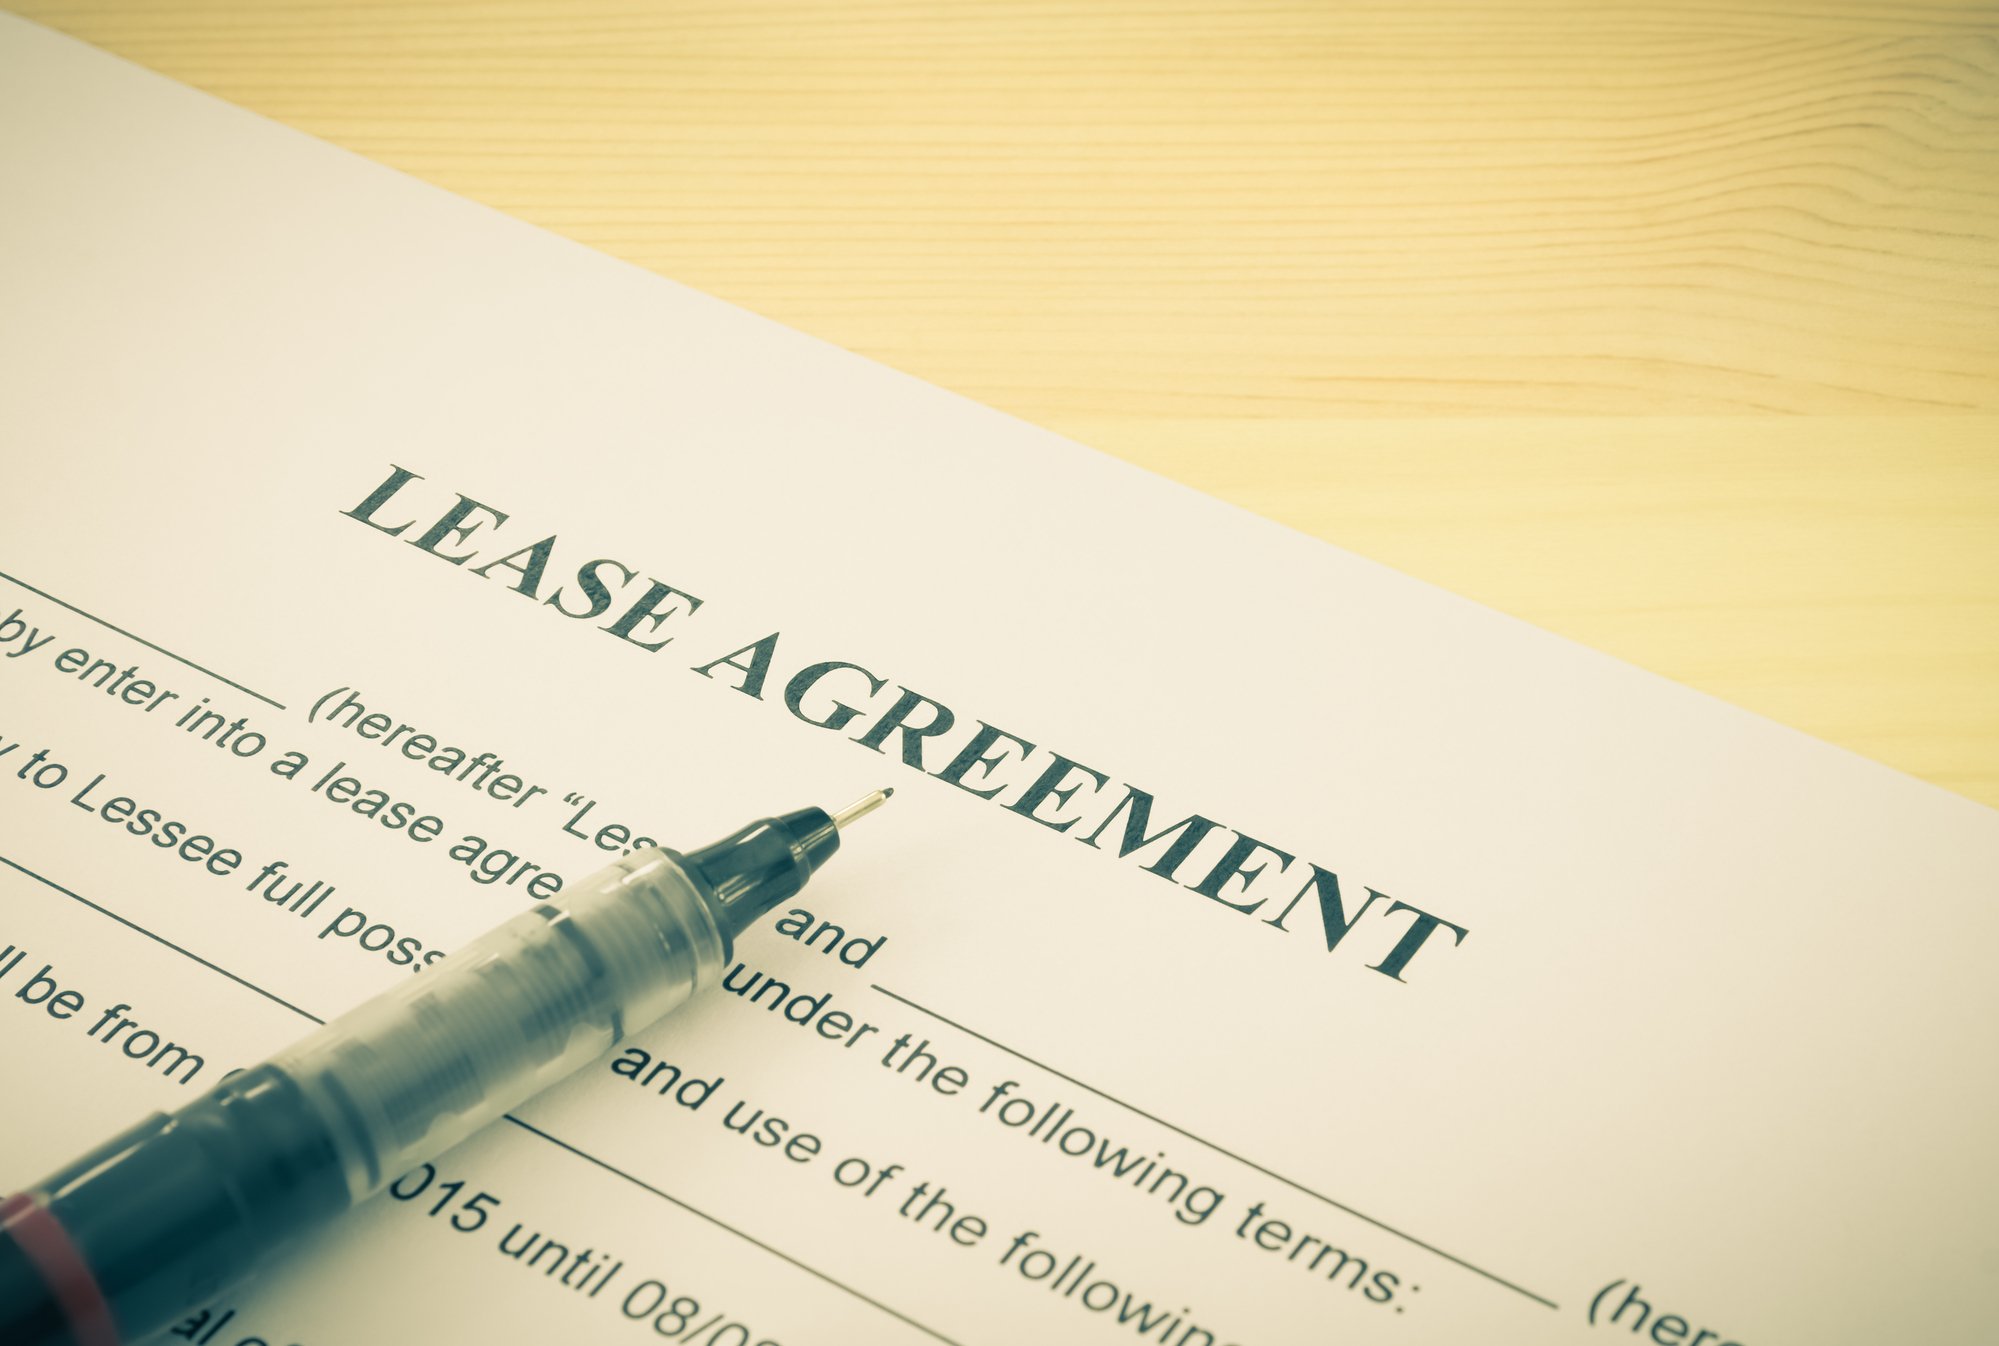 Lease Agreement Contract Document and Pen Bottom Left Corner Vintage Style